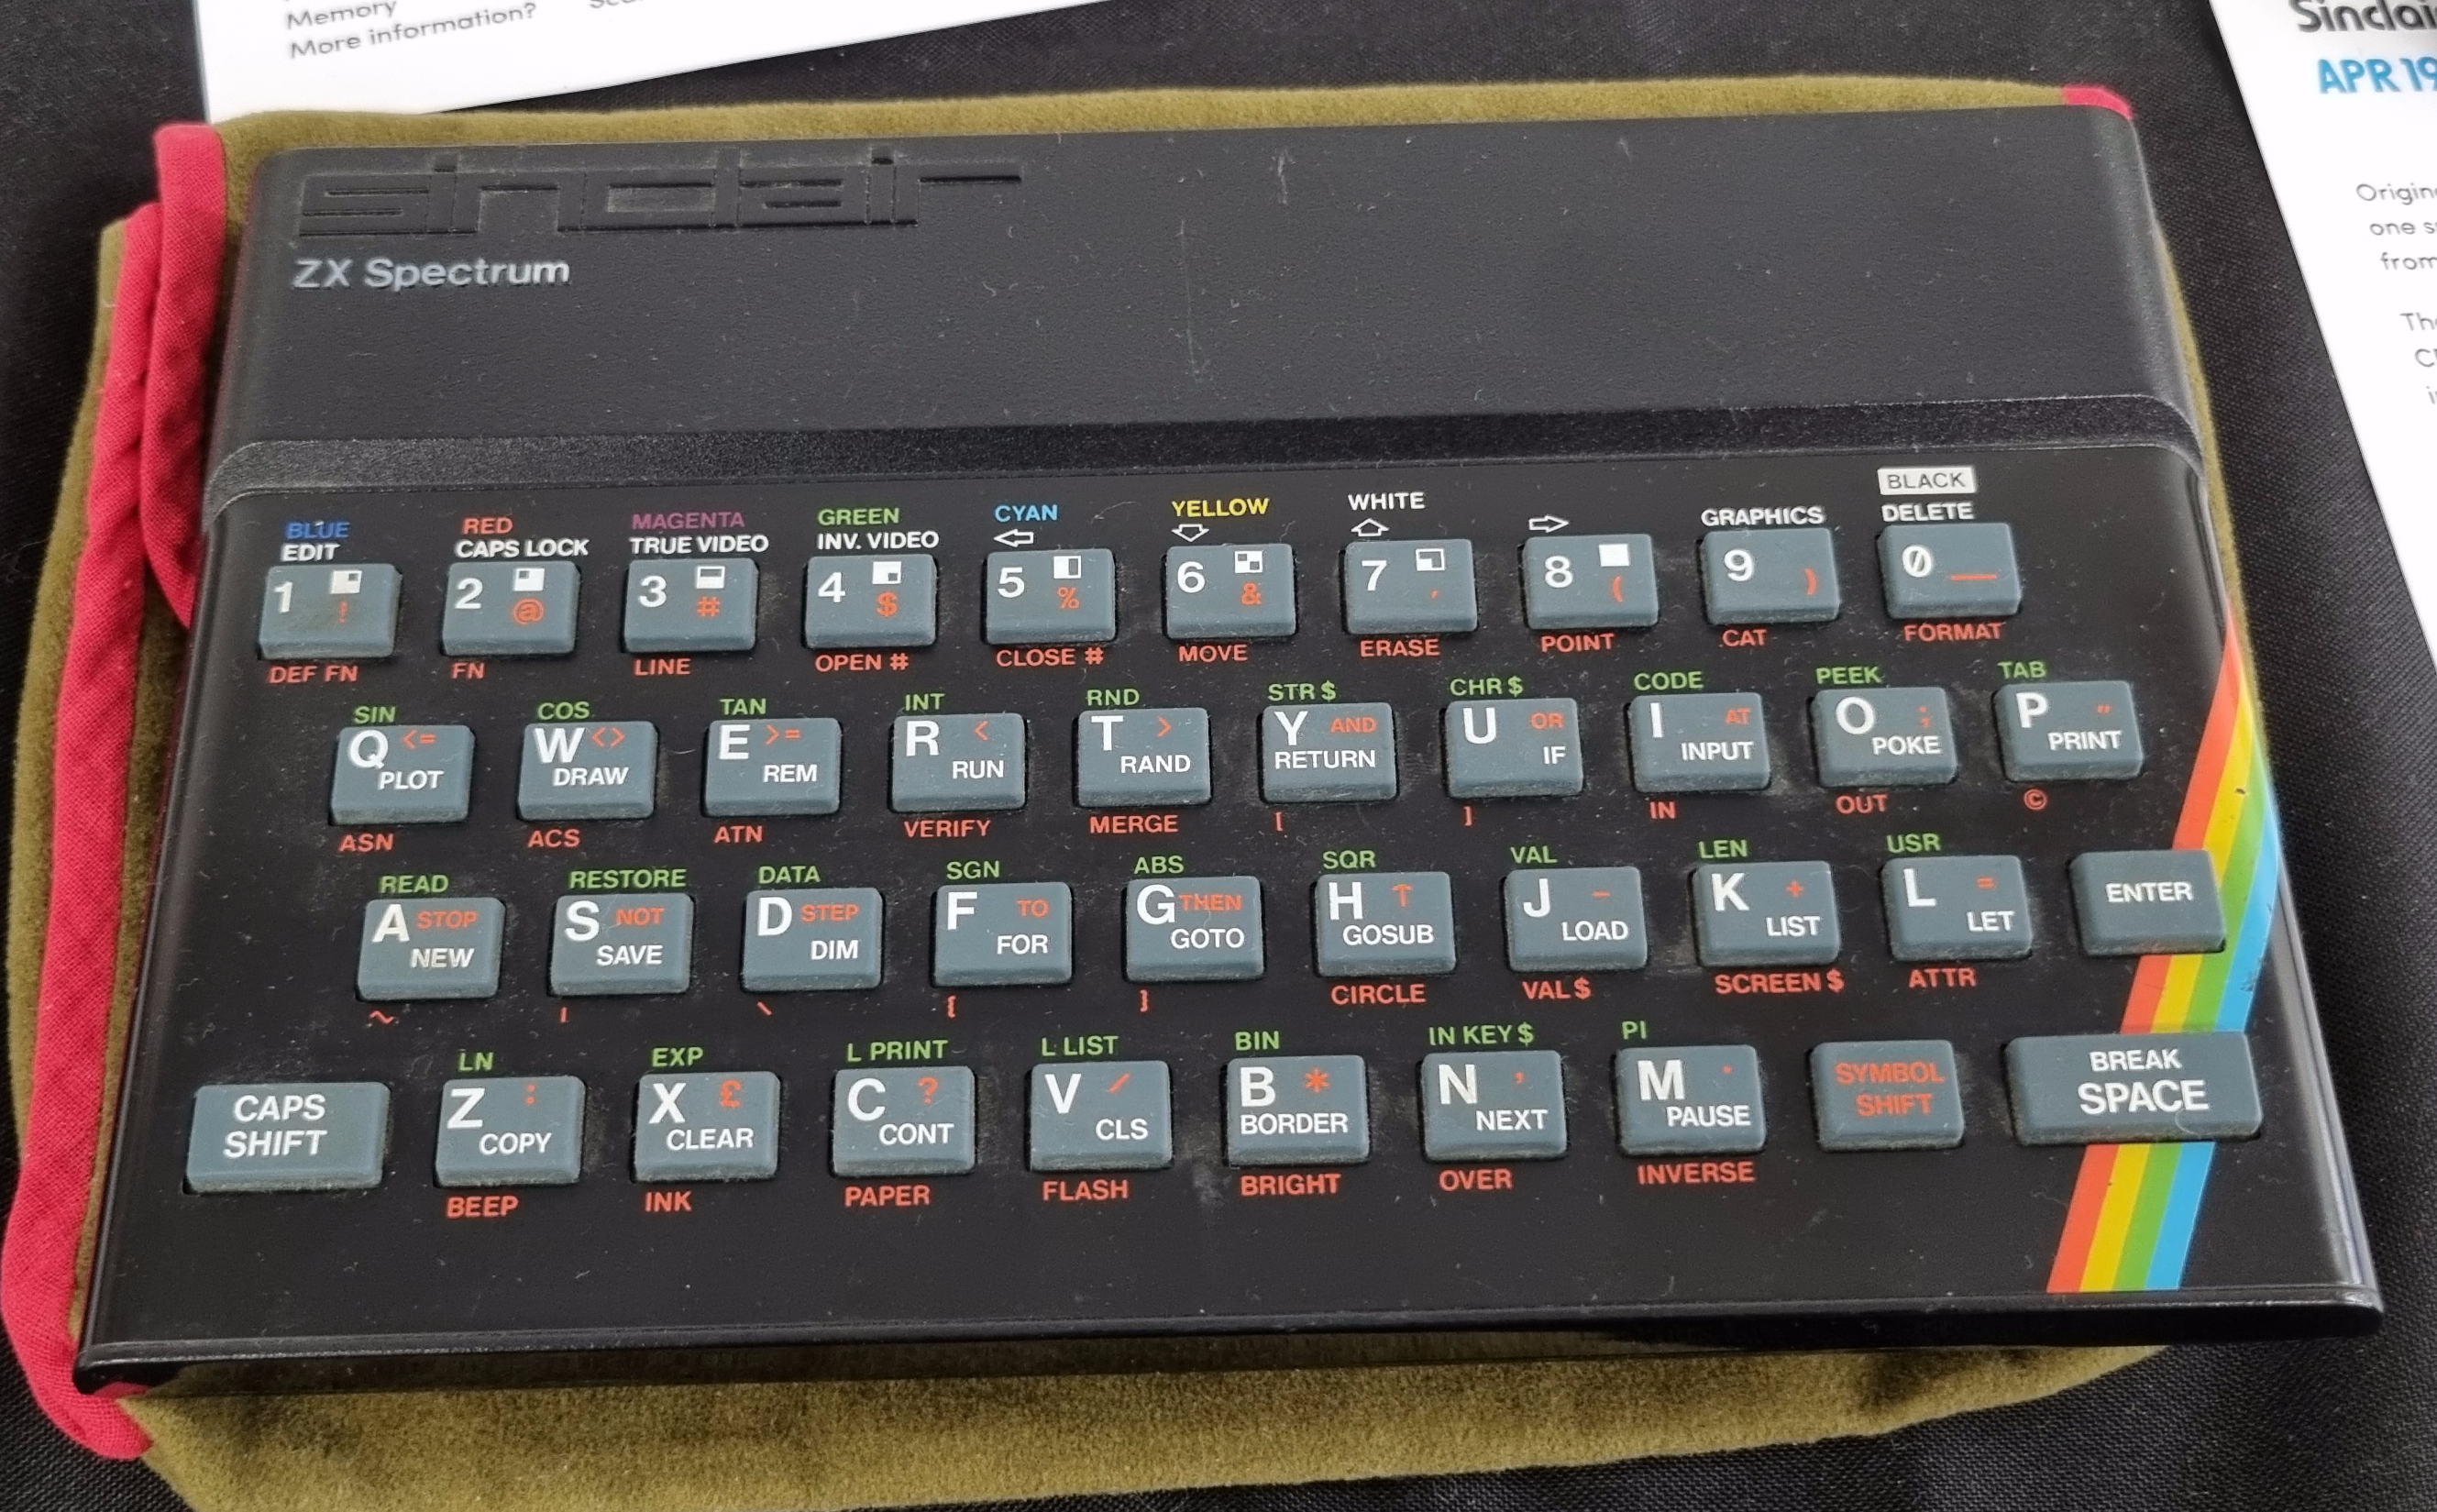 The ZX Spectrum by Sir Clive Sinclair